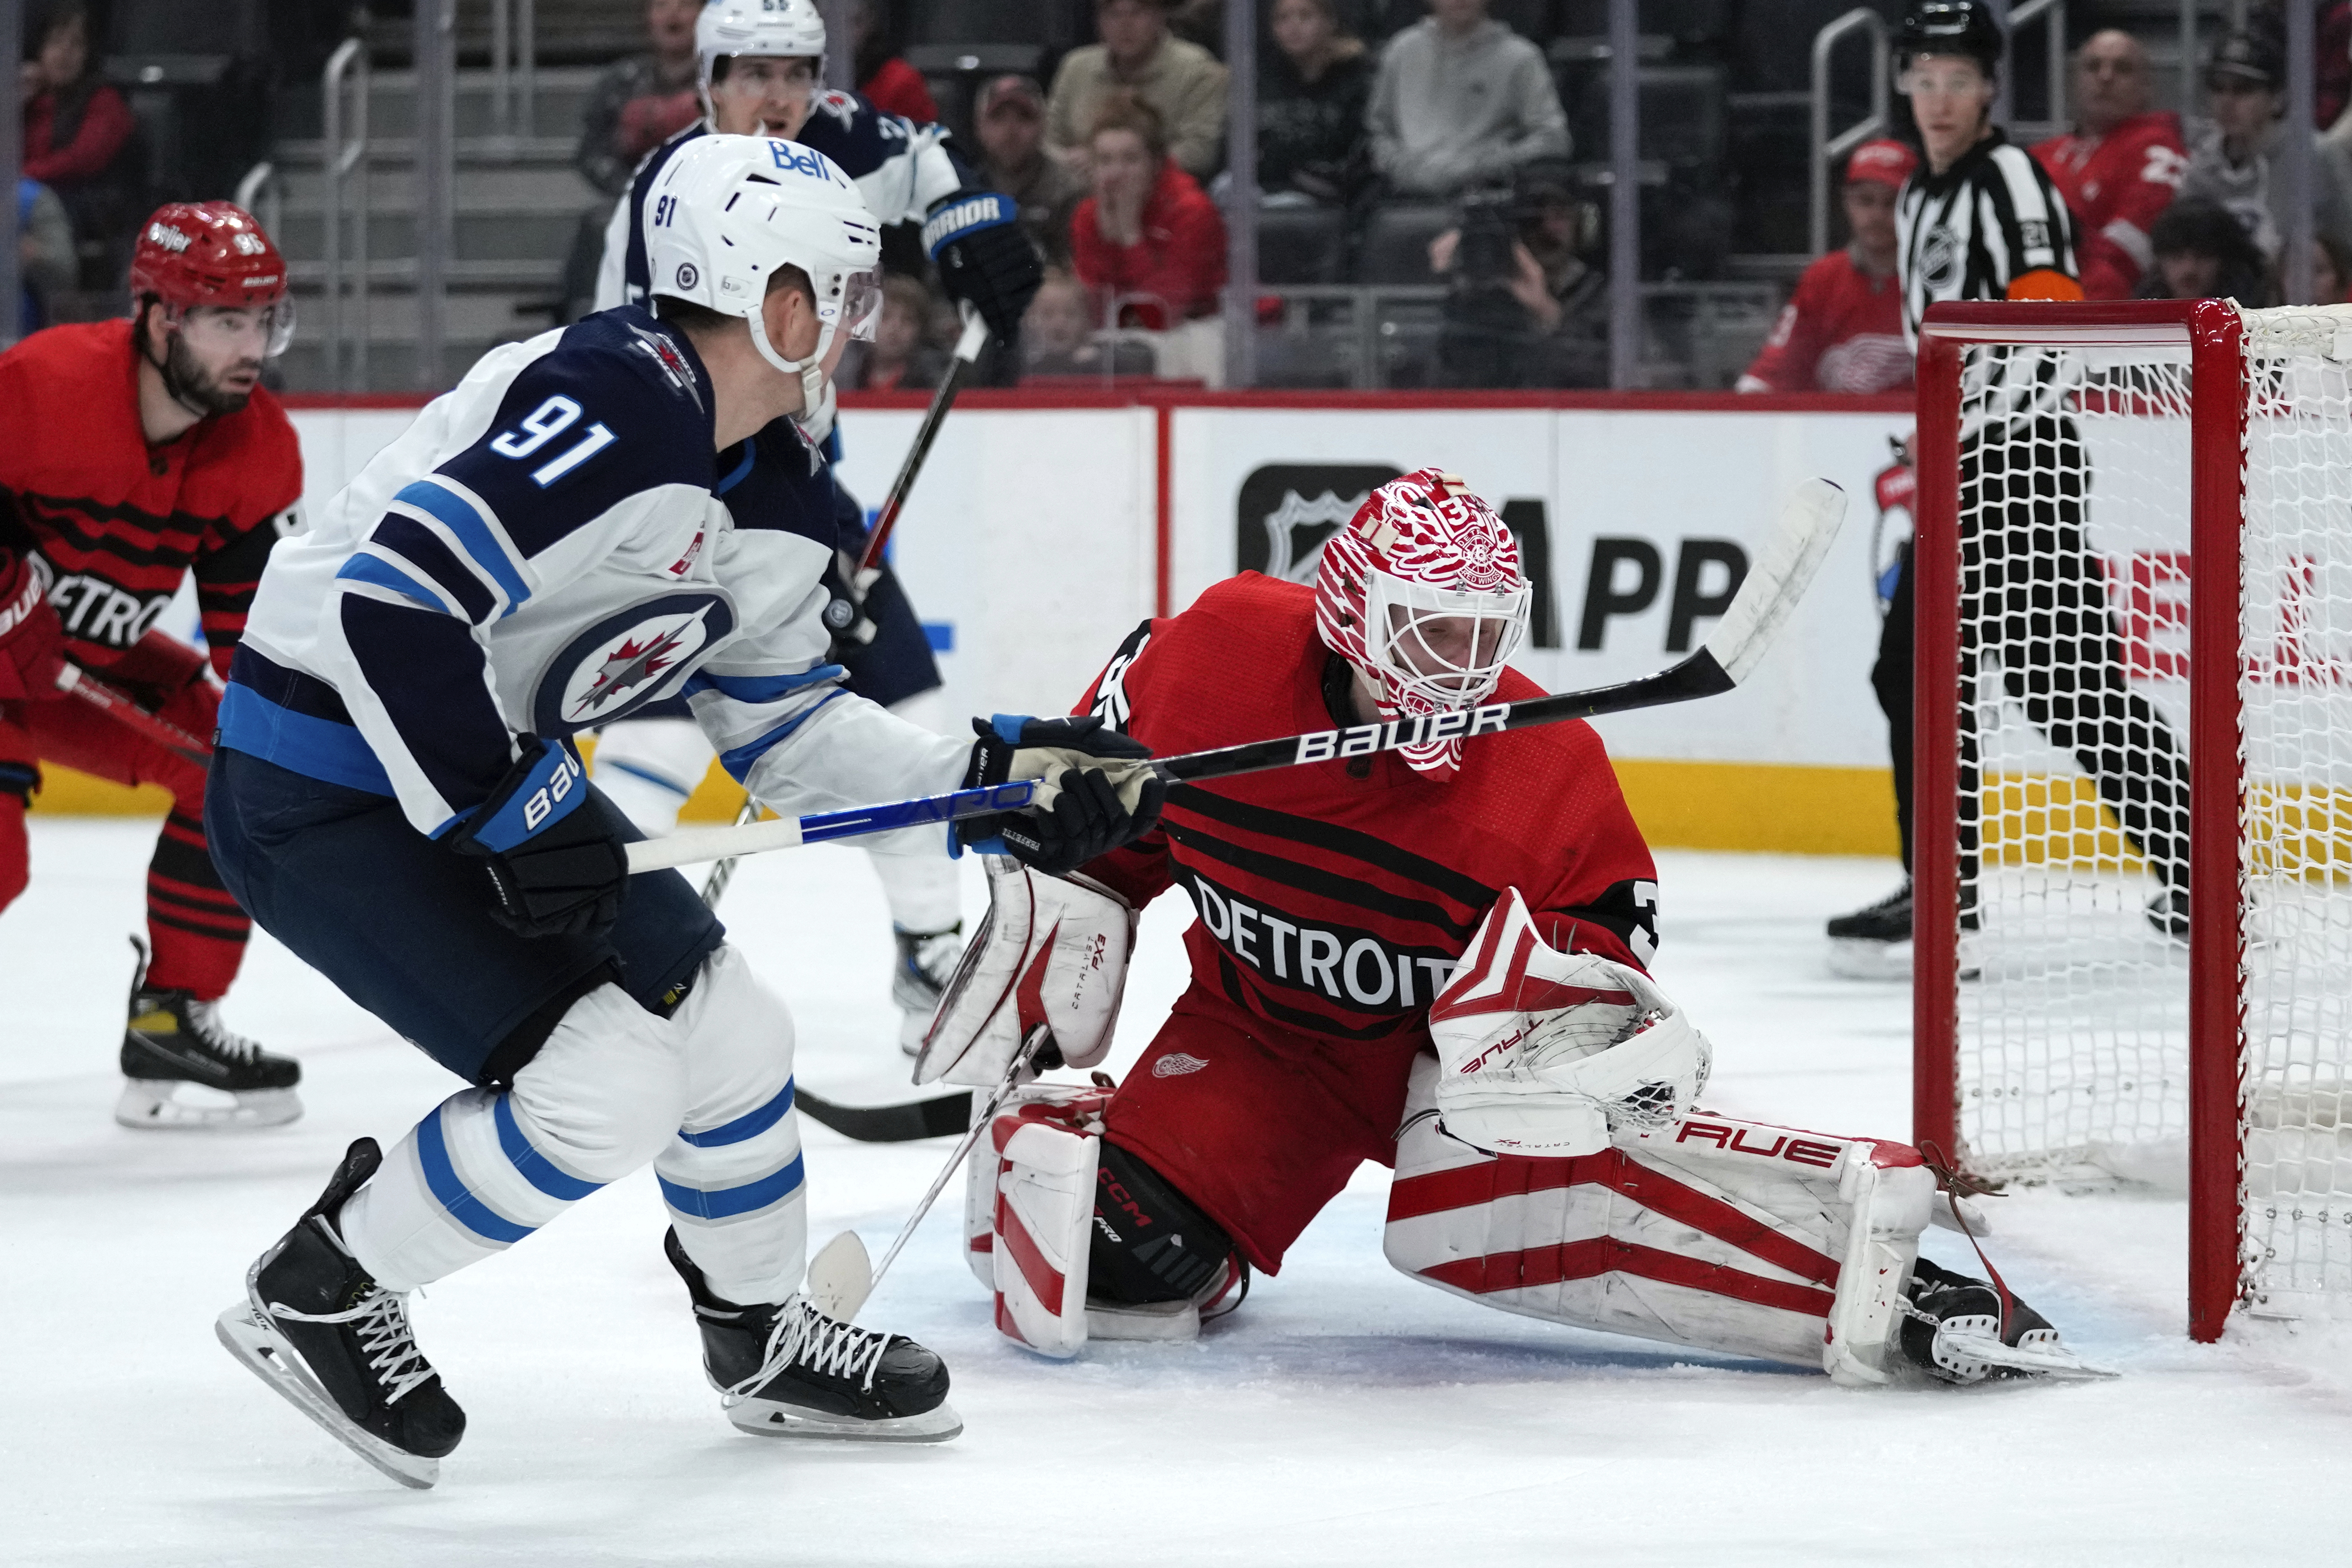 Jets' 5-game winning streak ends as Seider records 4 assists in Red Wings'  victory